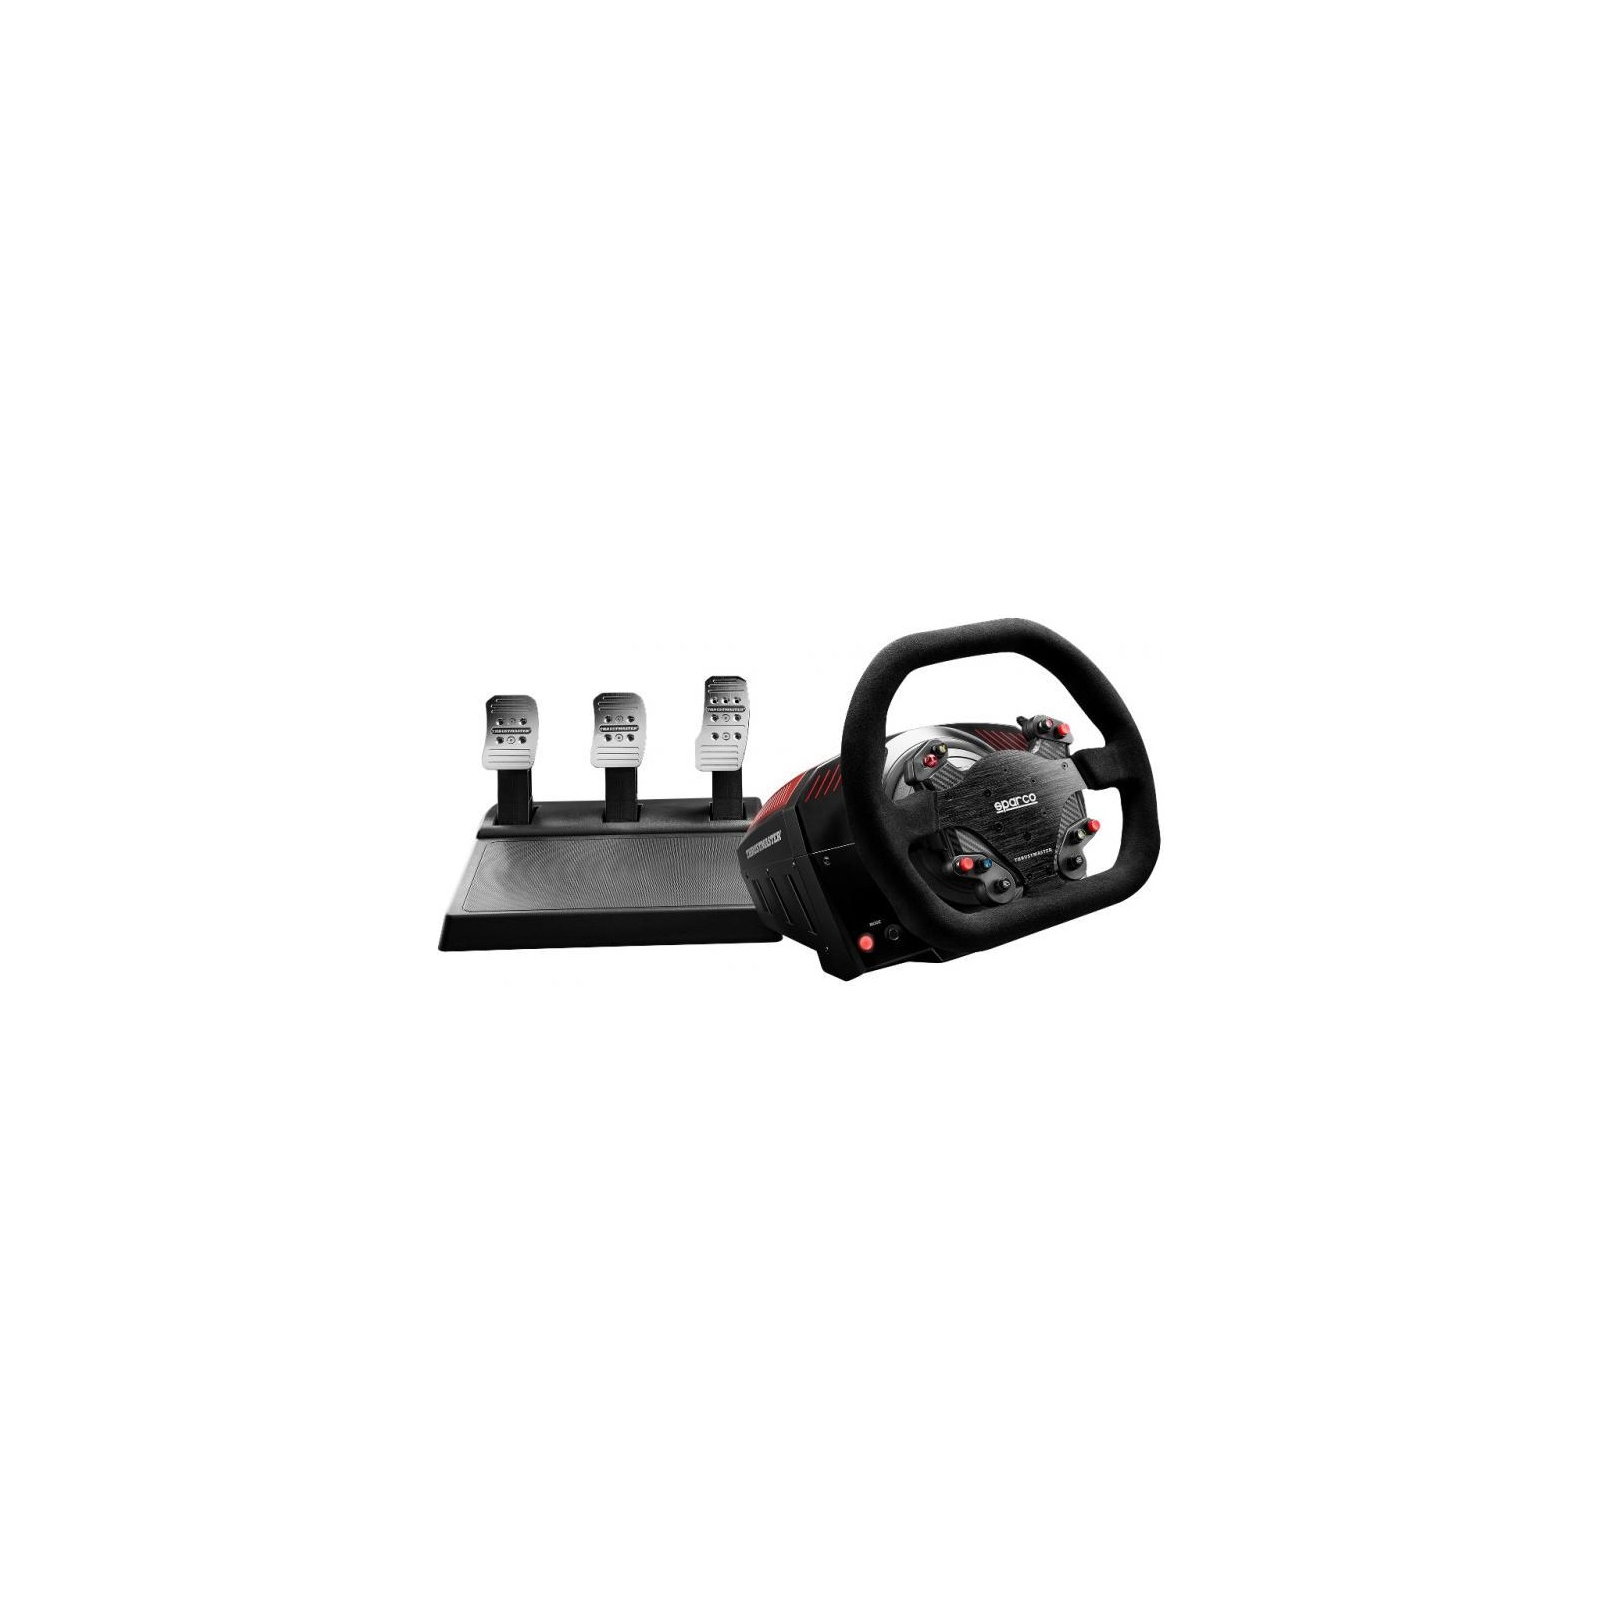 Кермо ThrustMaster TS-XW Racer Sparco P310 Competition Mod PC/Xbox One Black (4460157)